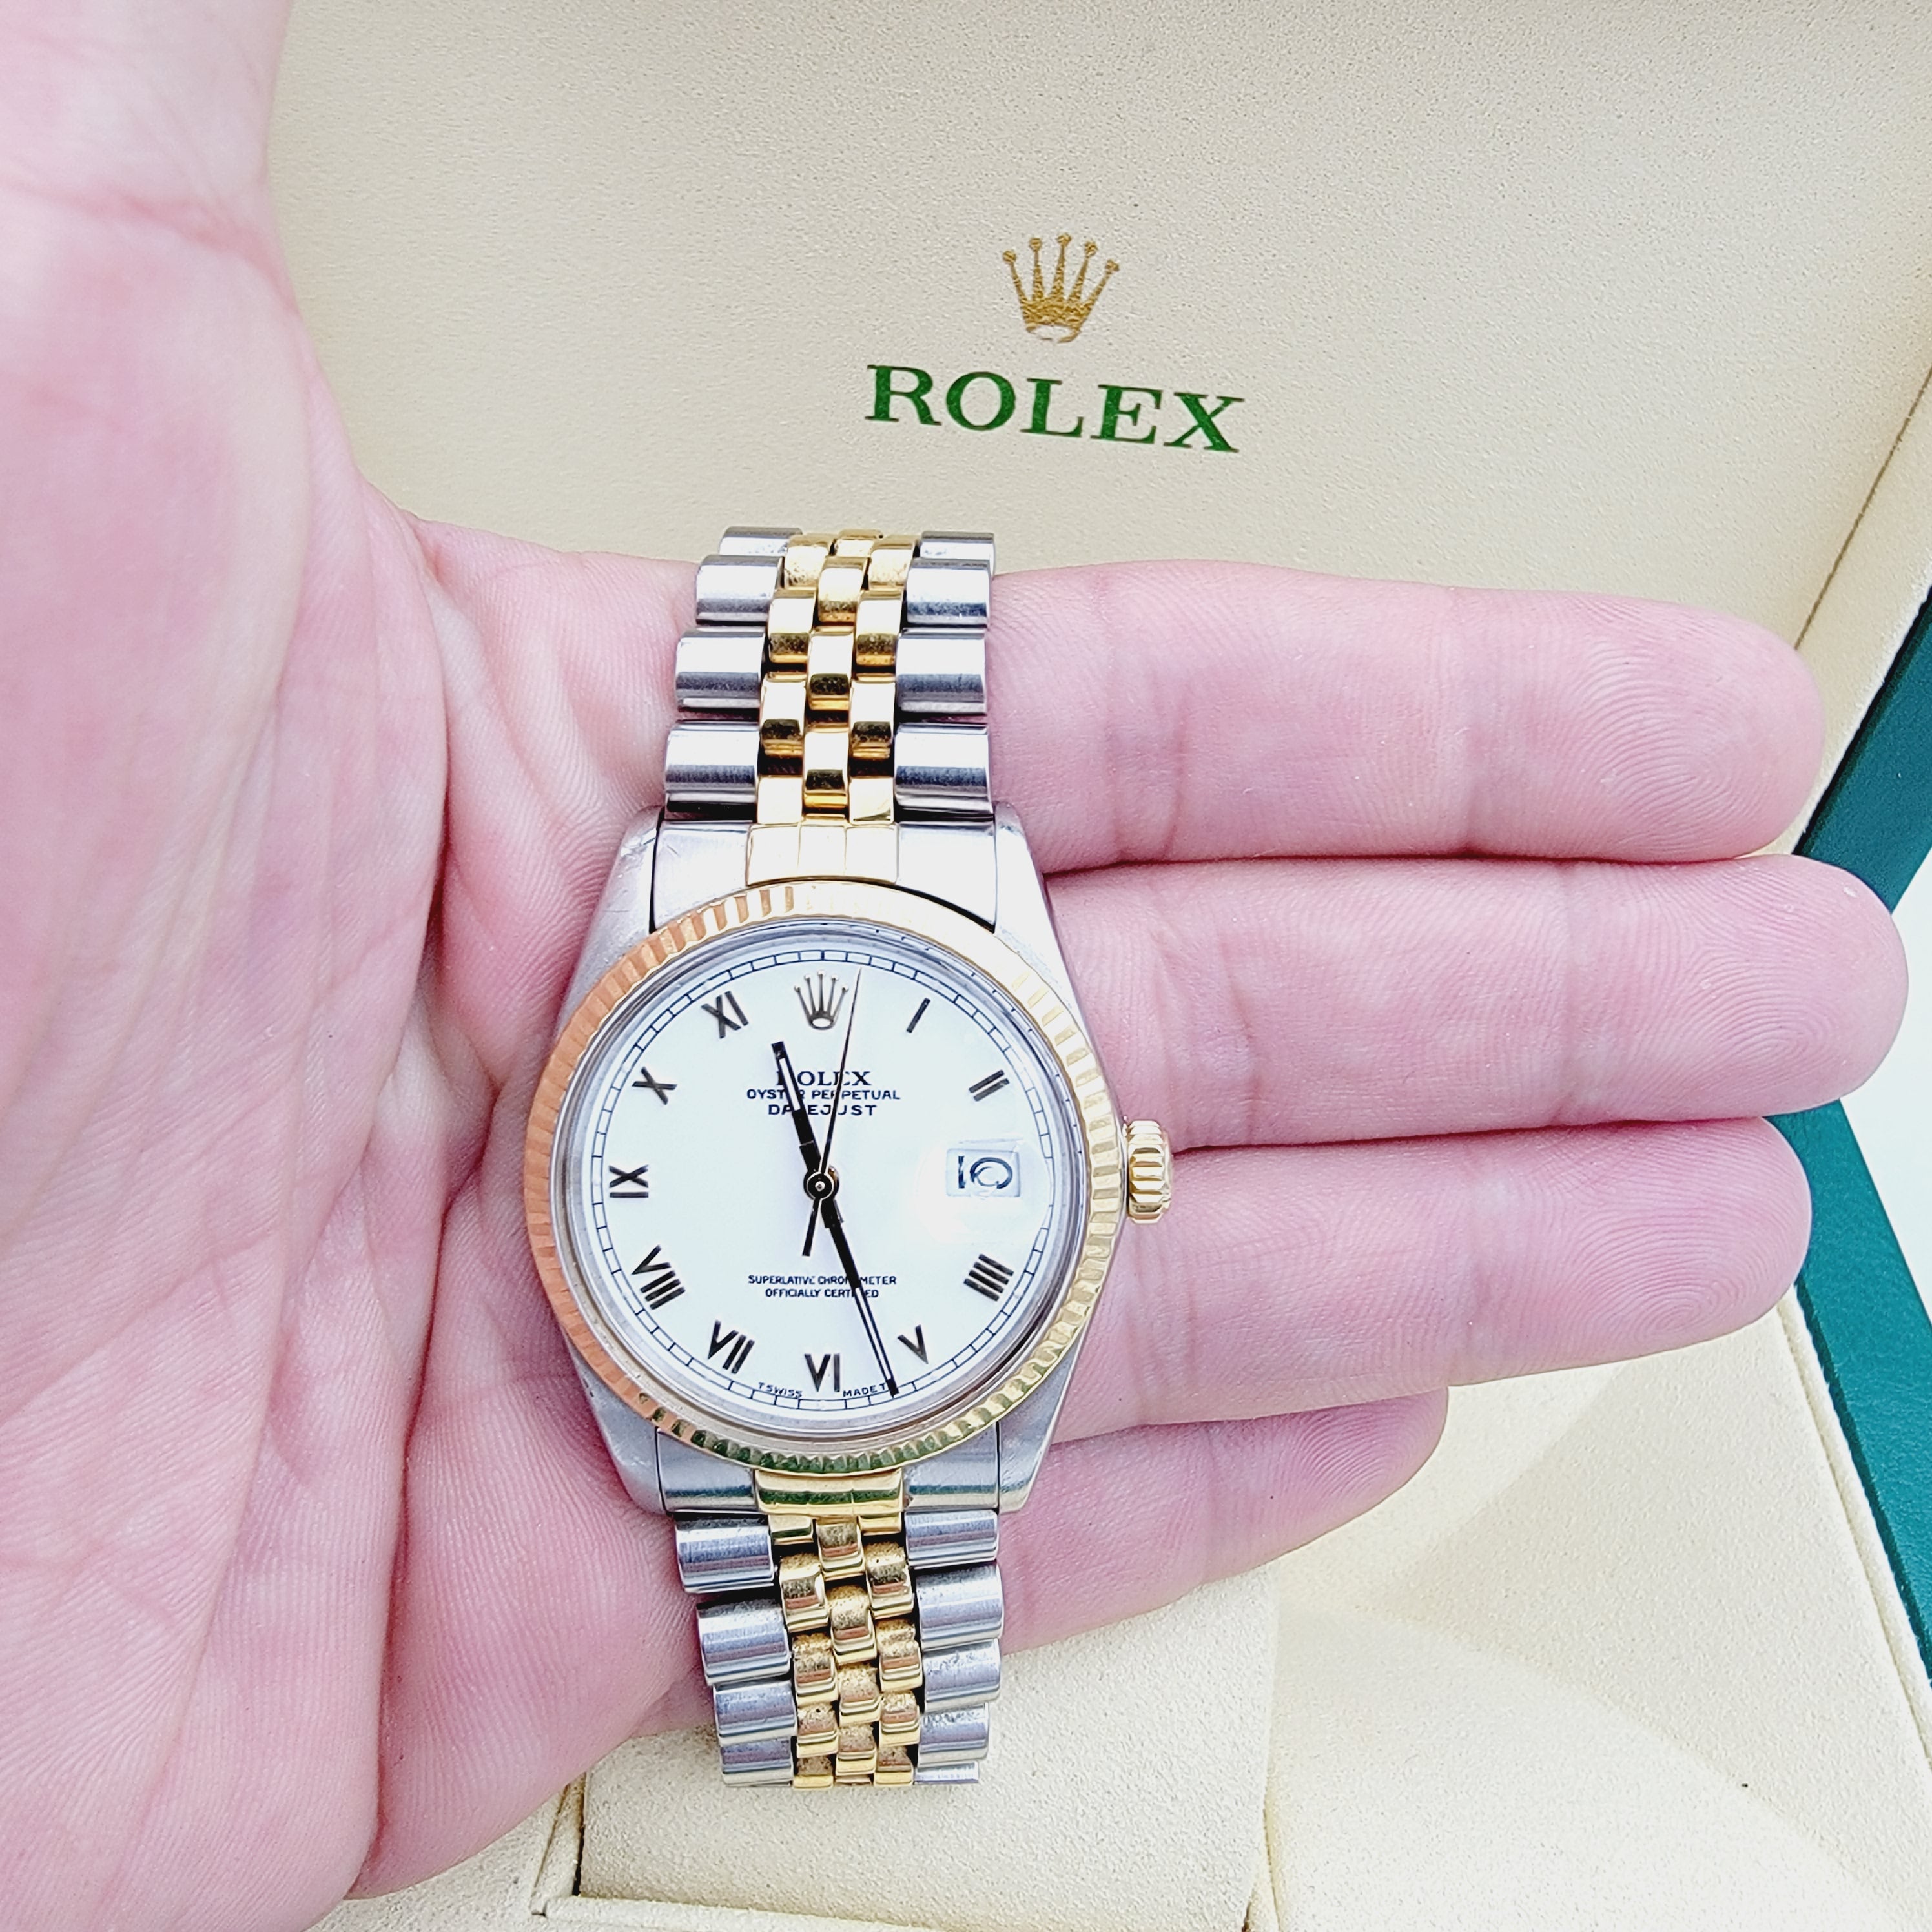 Men's Rolex 36mm DateJust 18k Gold / Stainless Steel Two Tone Watch with White Dial and Fluted Bezel. (Pre-Owned 16233)